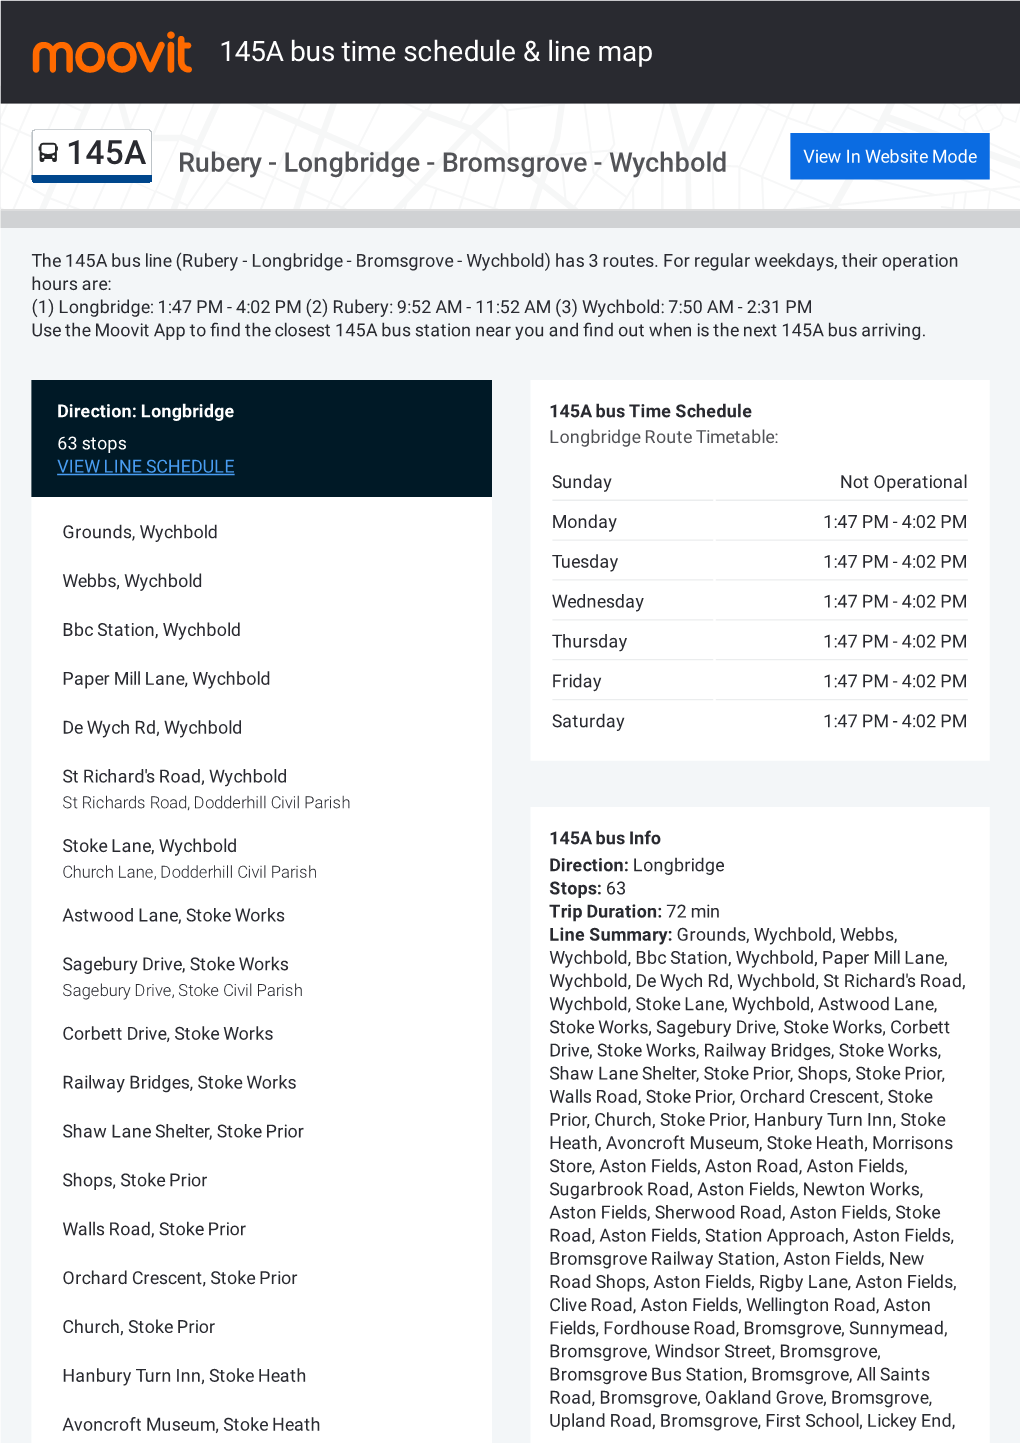 145A Bus Time Schedule & Line Route